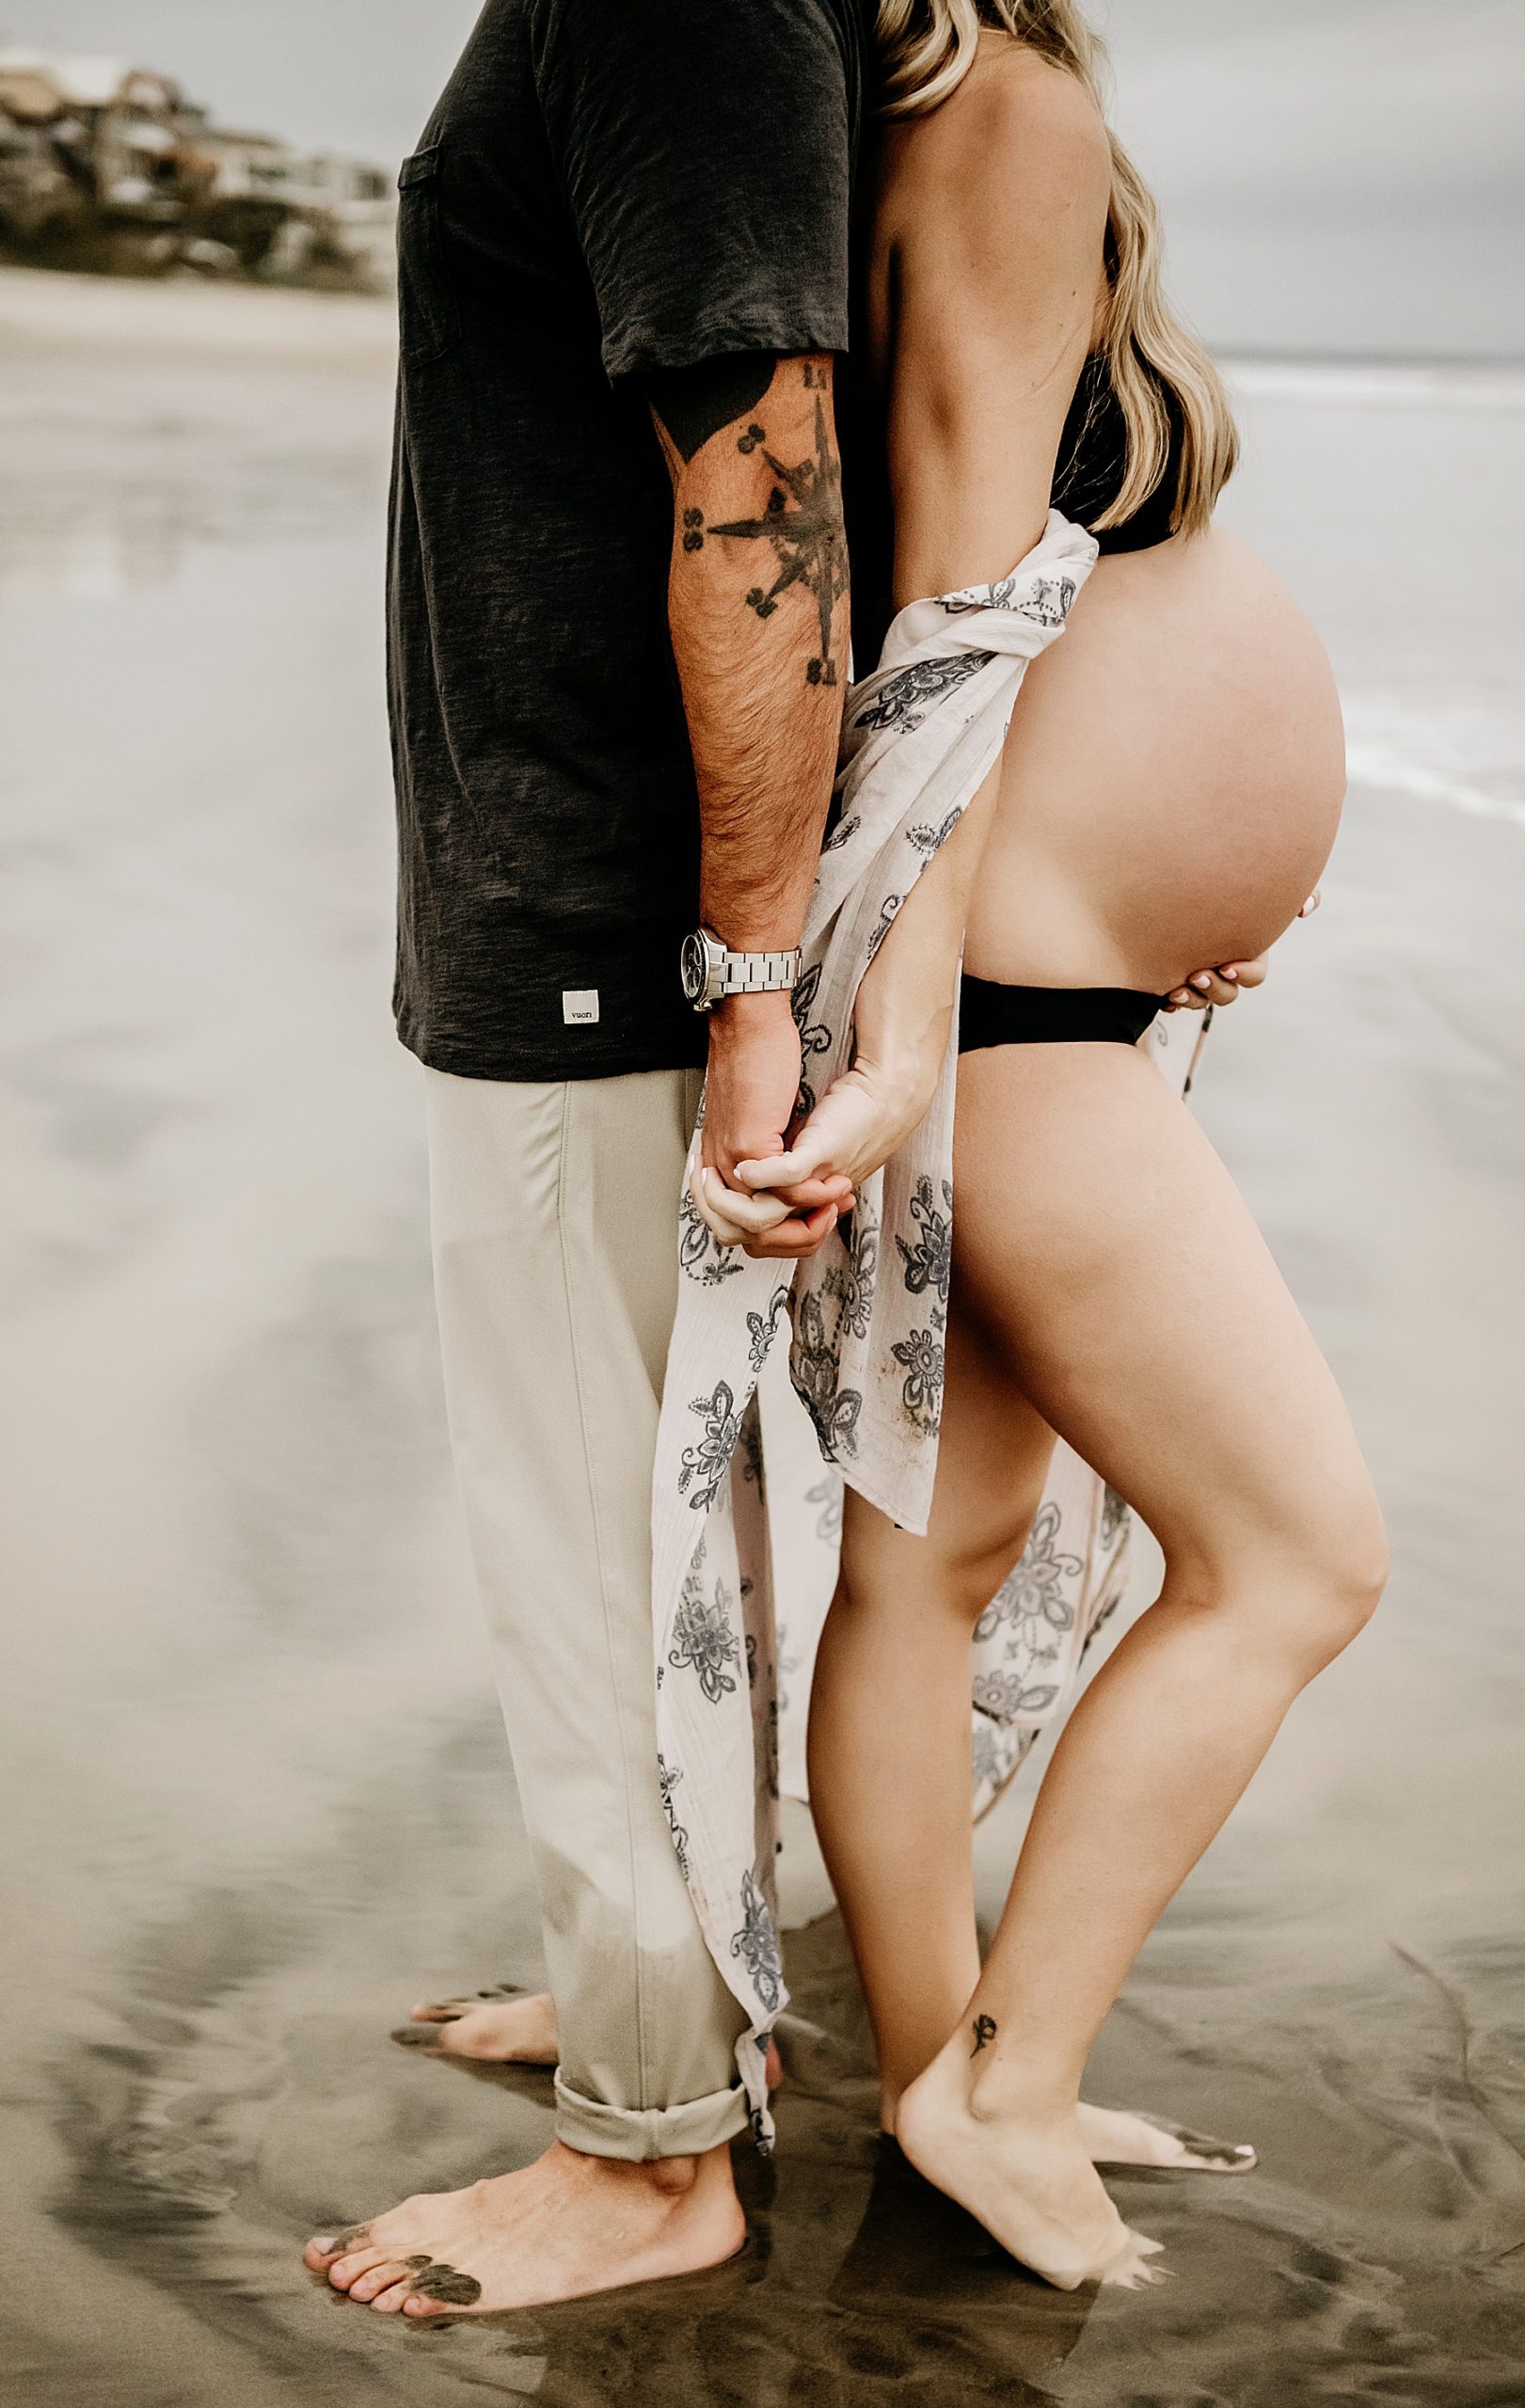 beach maternity couple pictures